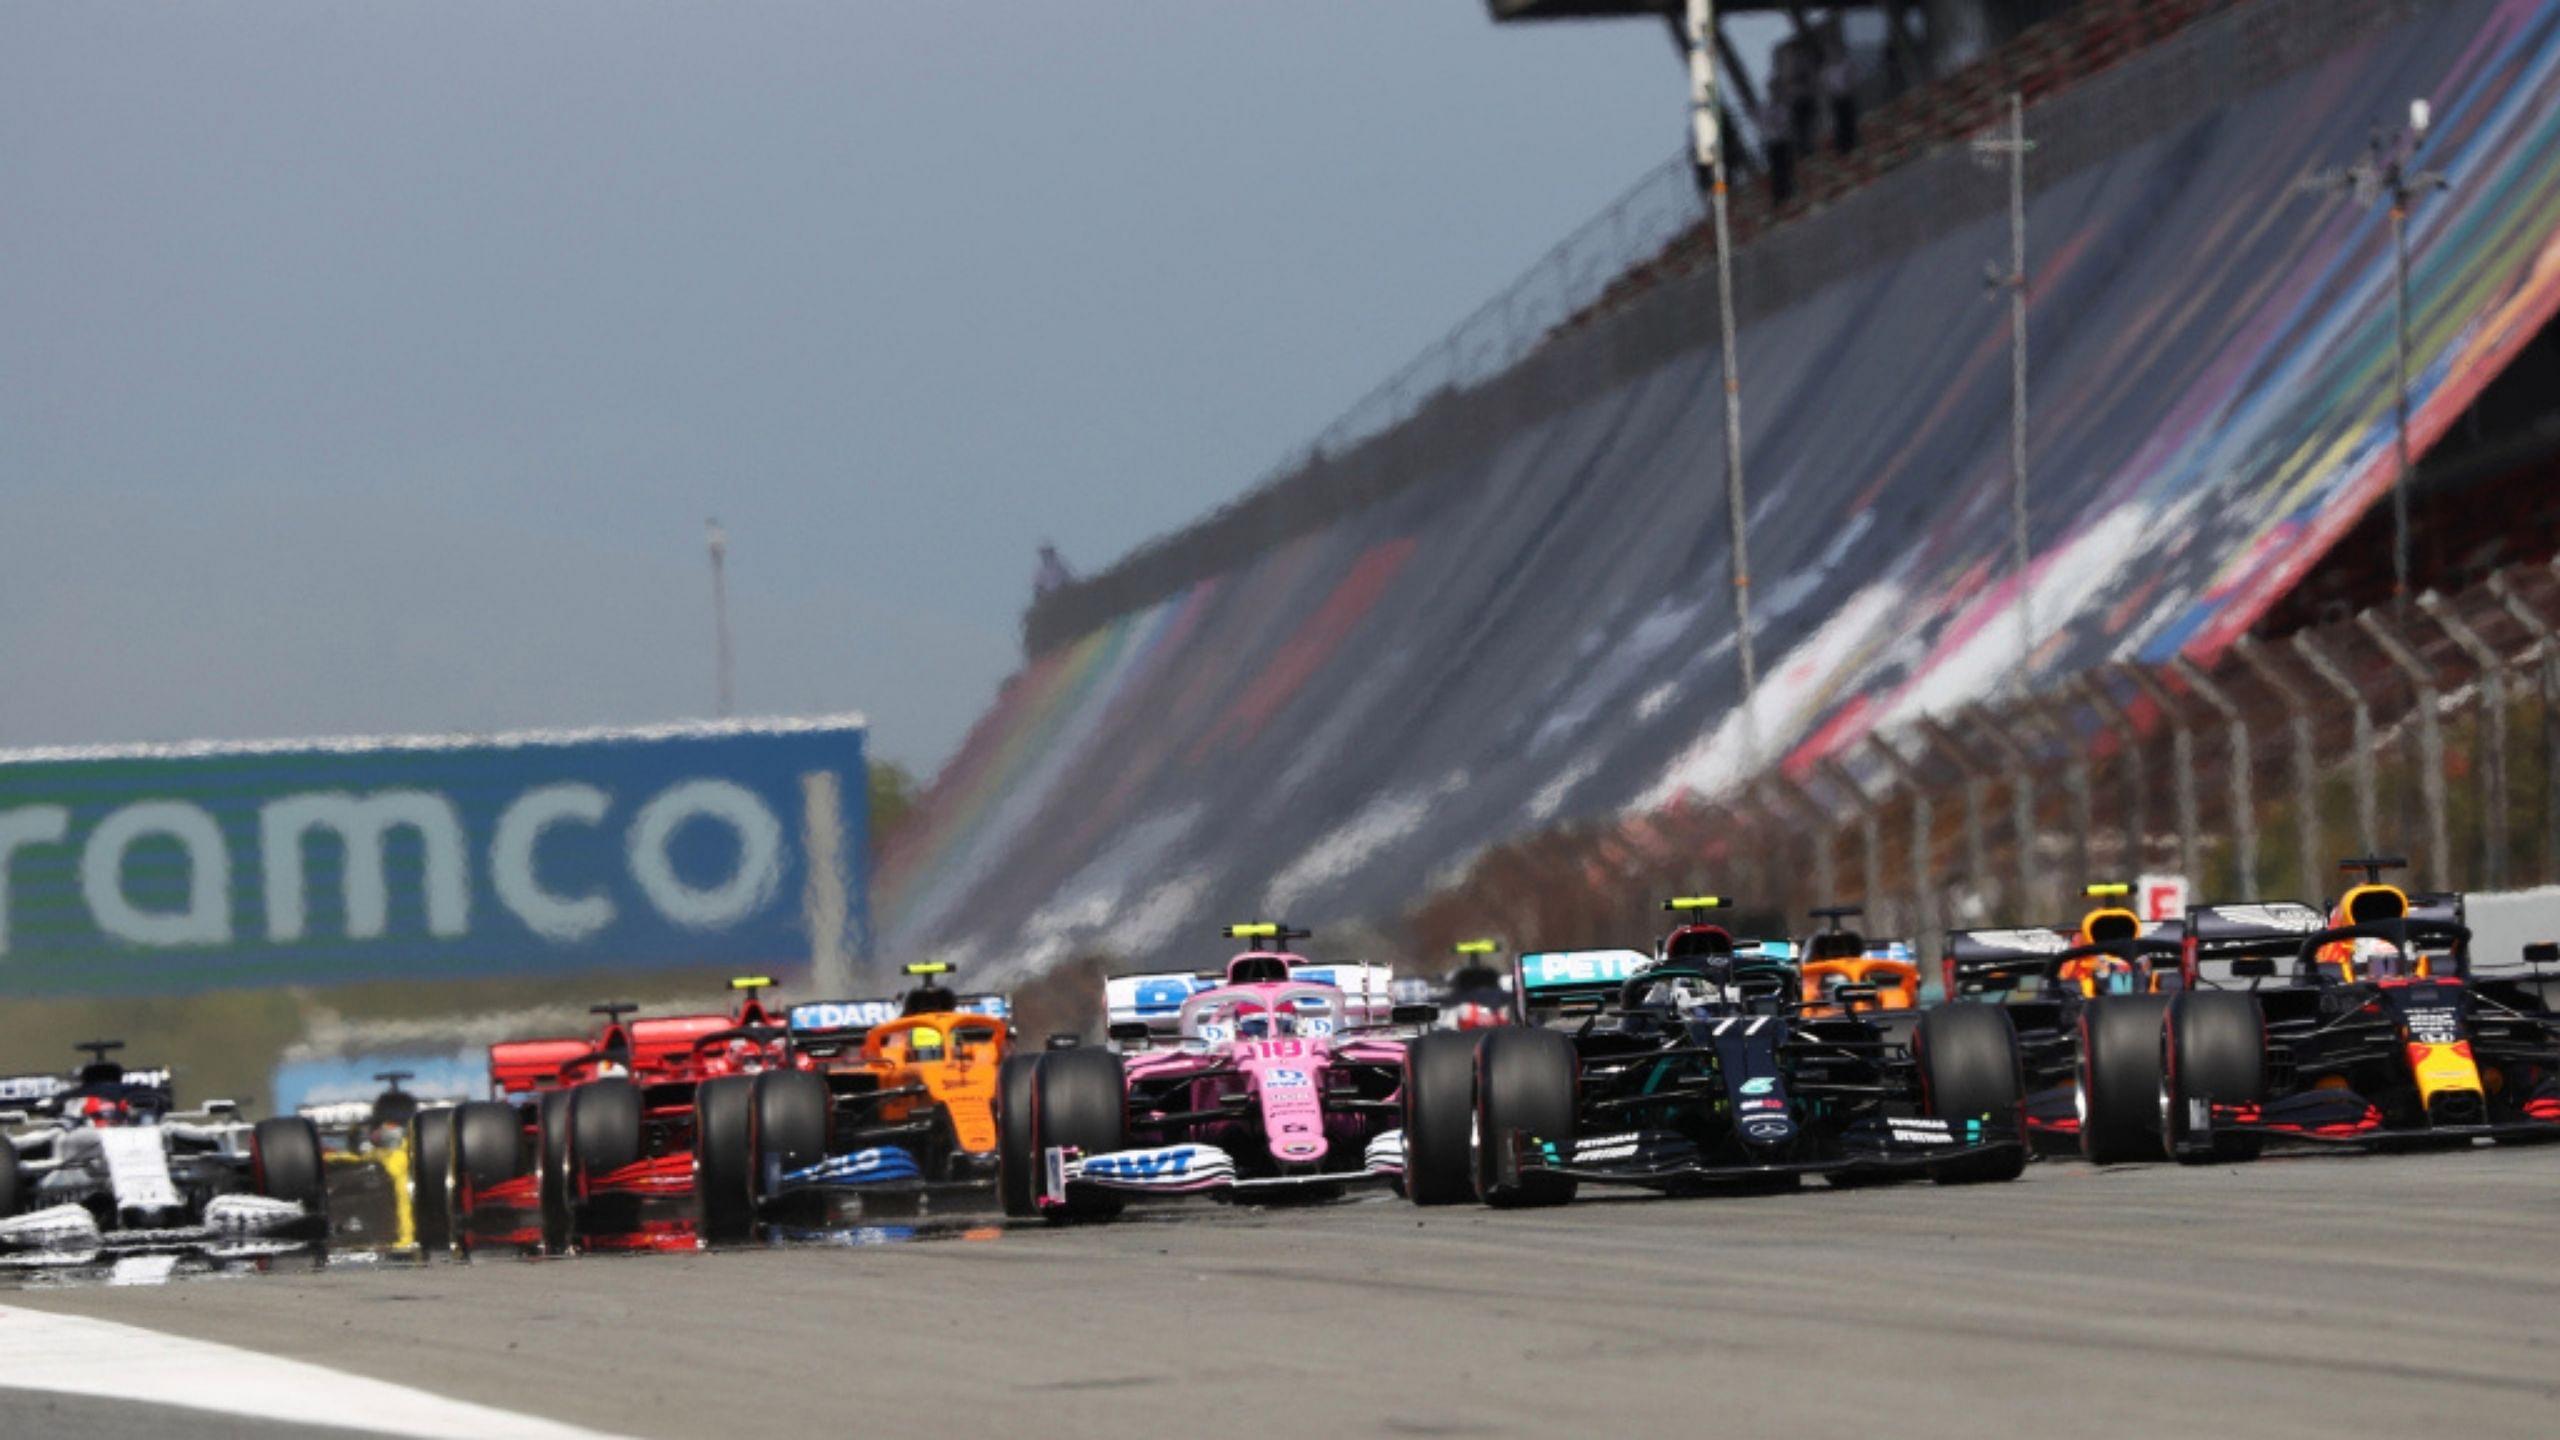 F1 2021 Calendar: Which races have made it to the longest ever F1 Calendar in history?